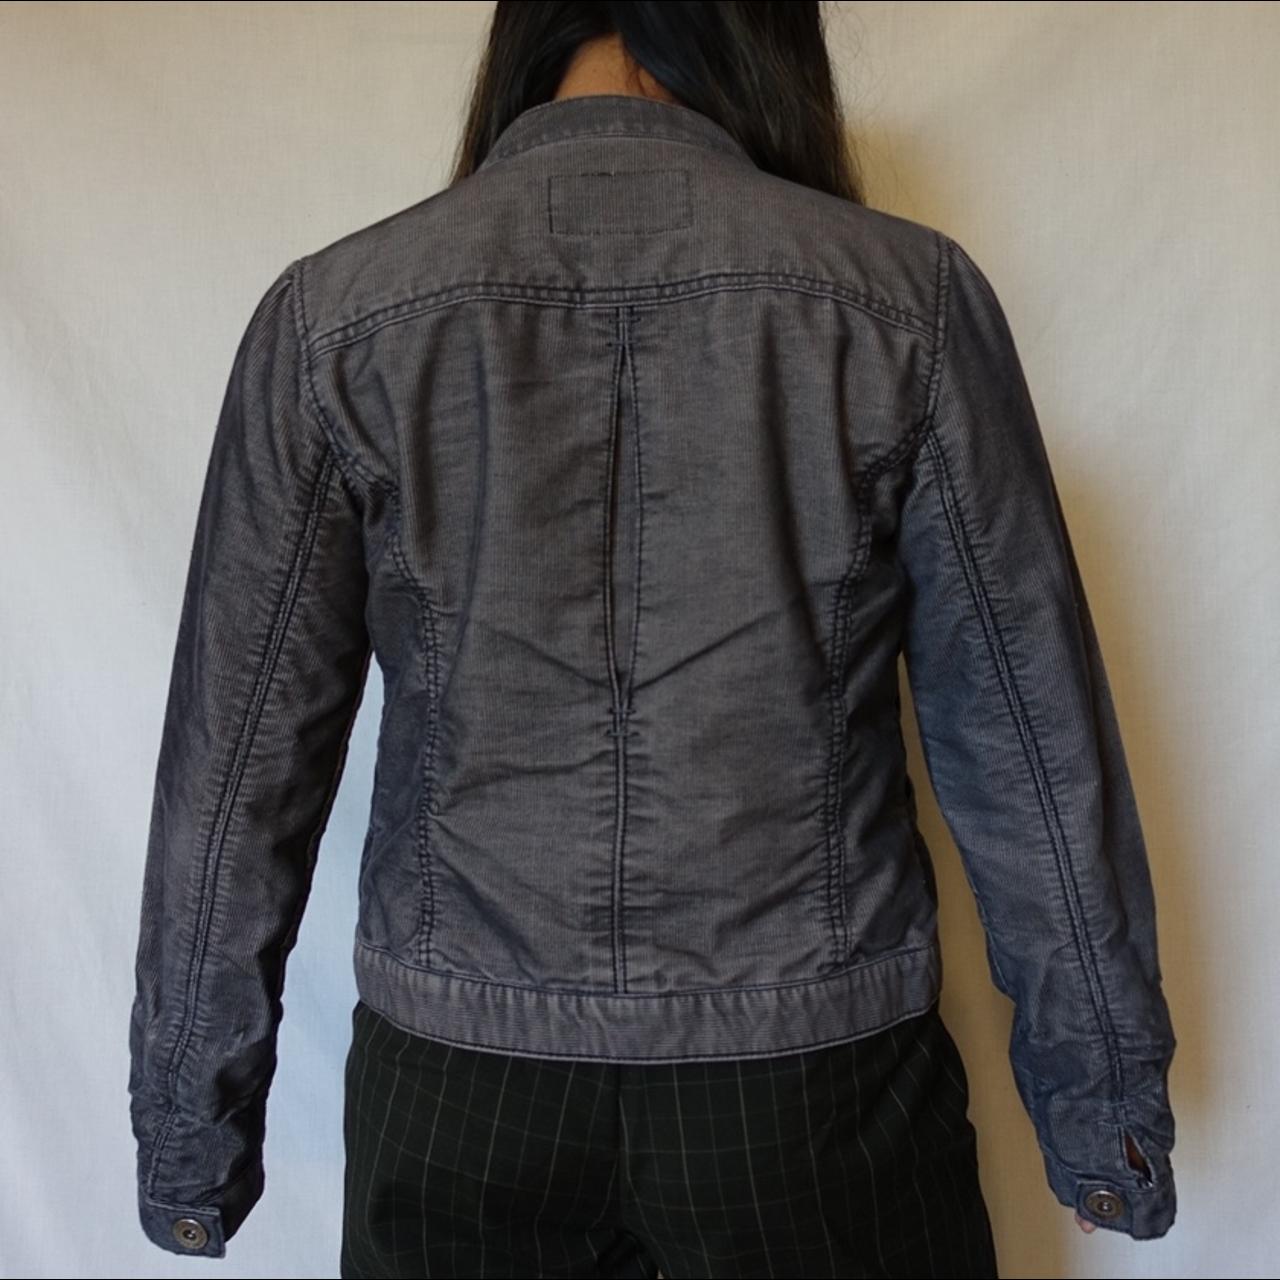 American Vintage Women's Grey and Silver Jacket (4)